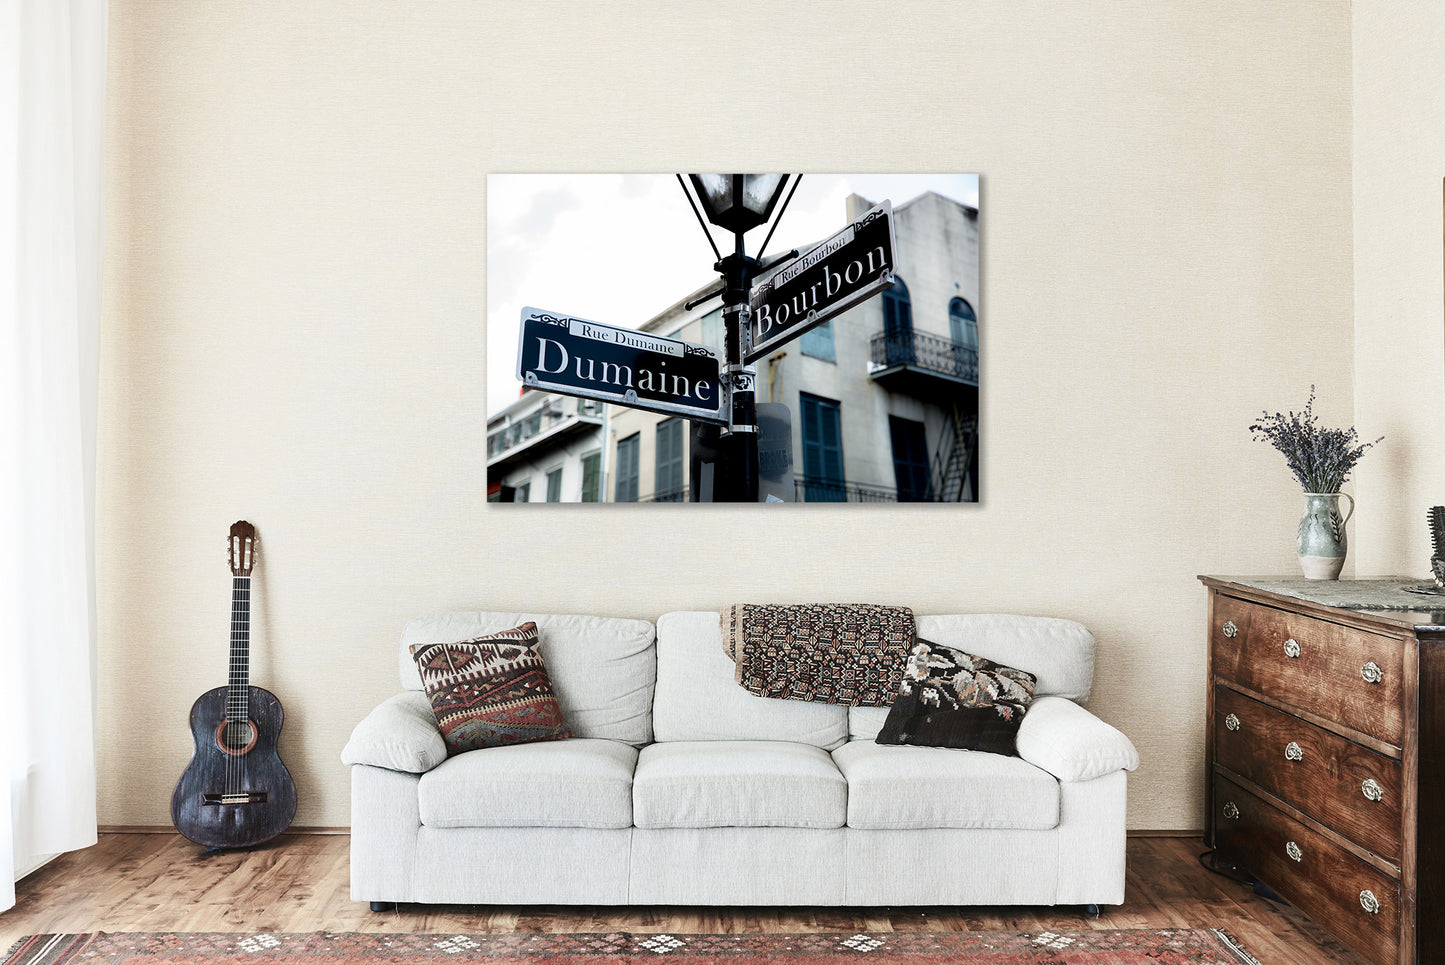 NOLA Metal Print (Ready to Hang) Photo on Aluminum of Street Signs at Intersection of Dumaine and Bourbon Street in New Orleans Louisiana Wall Art French Quarter Decor